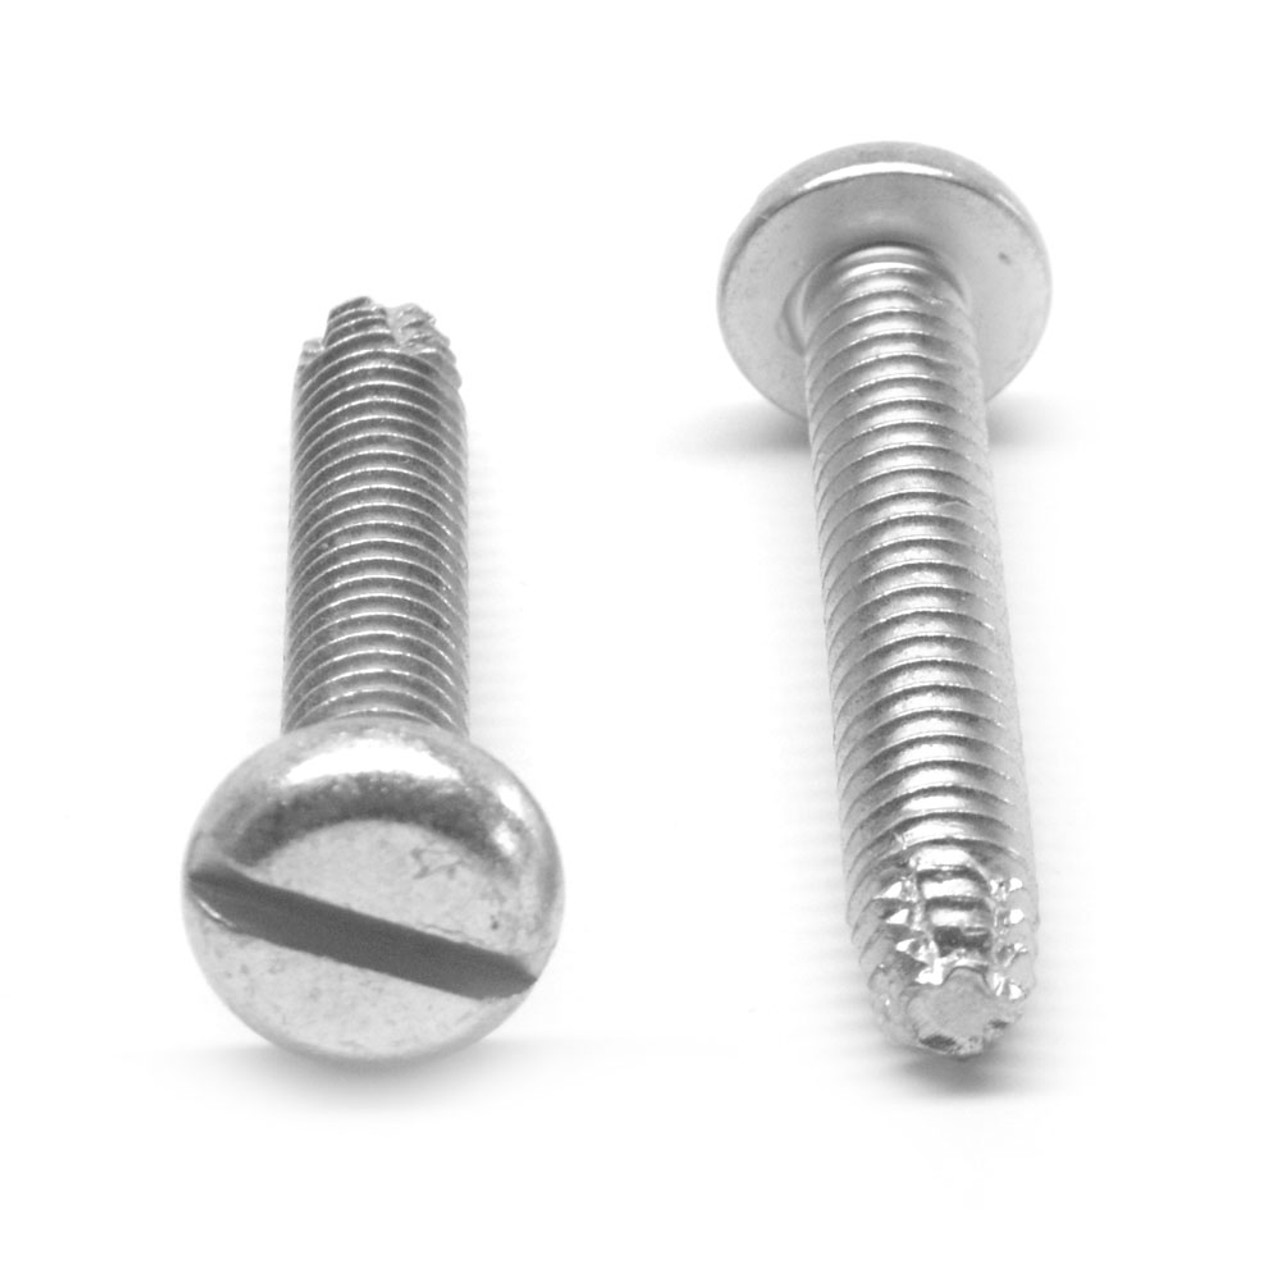 #4-40 x 5/8" (FT) Coarse Thread Thread Cutting Screw Slotted Pan Head Type F Low Carbon Steel Zinc Plated